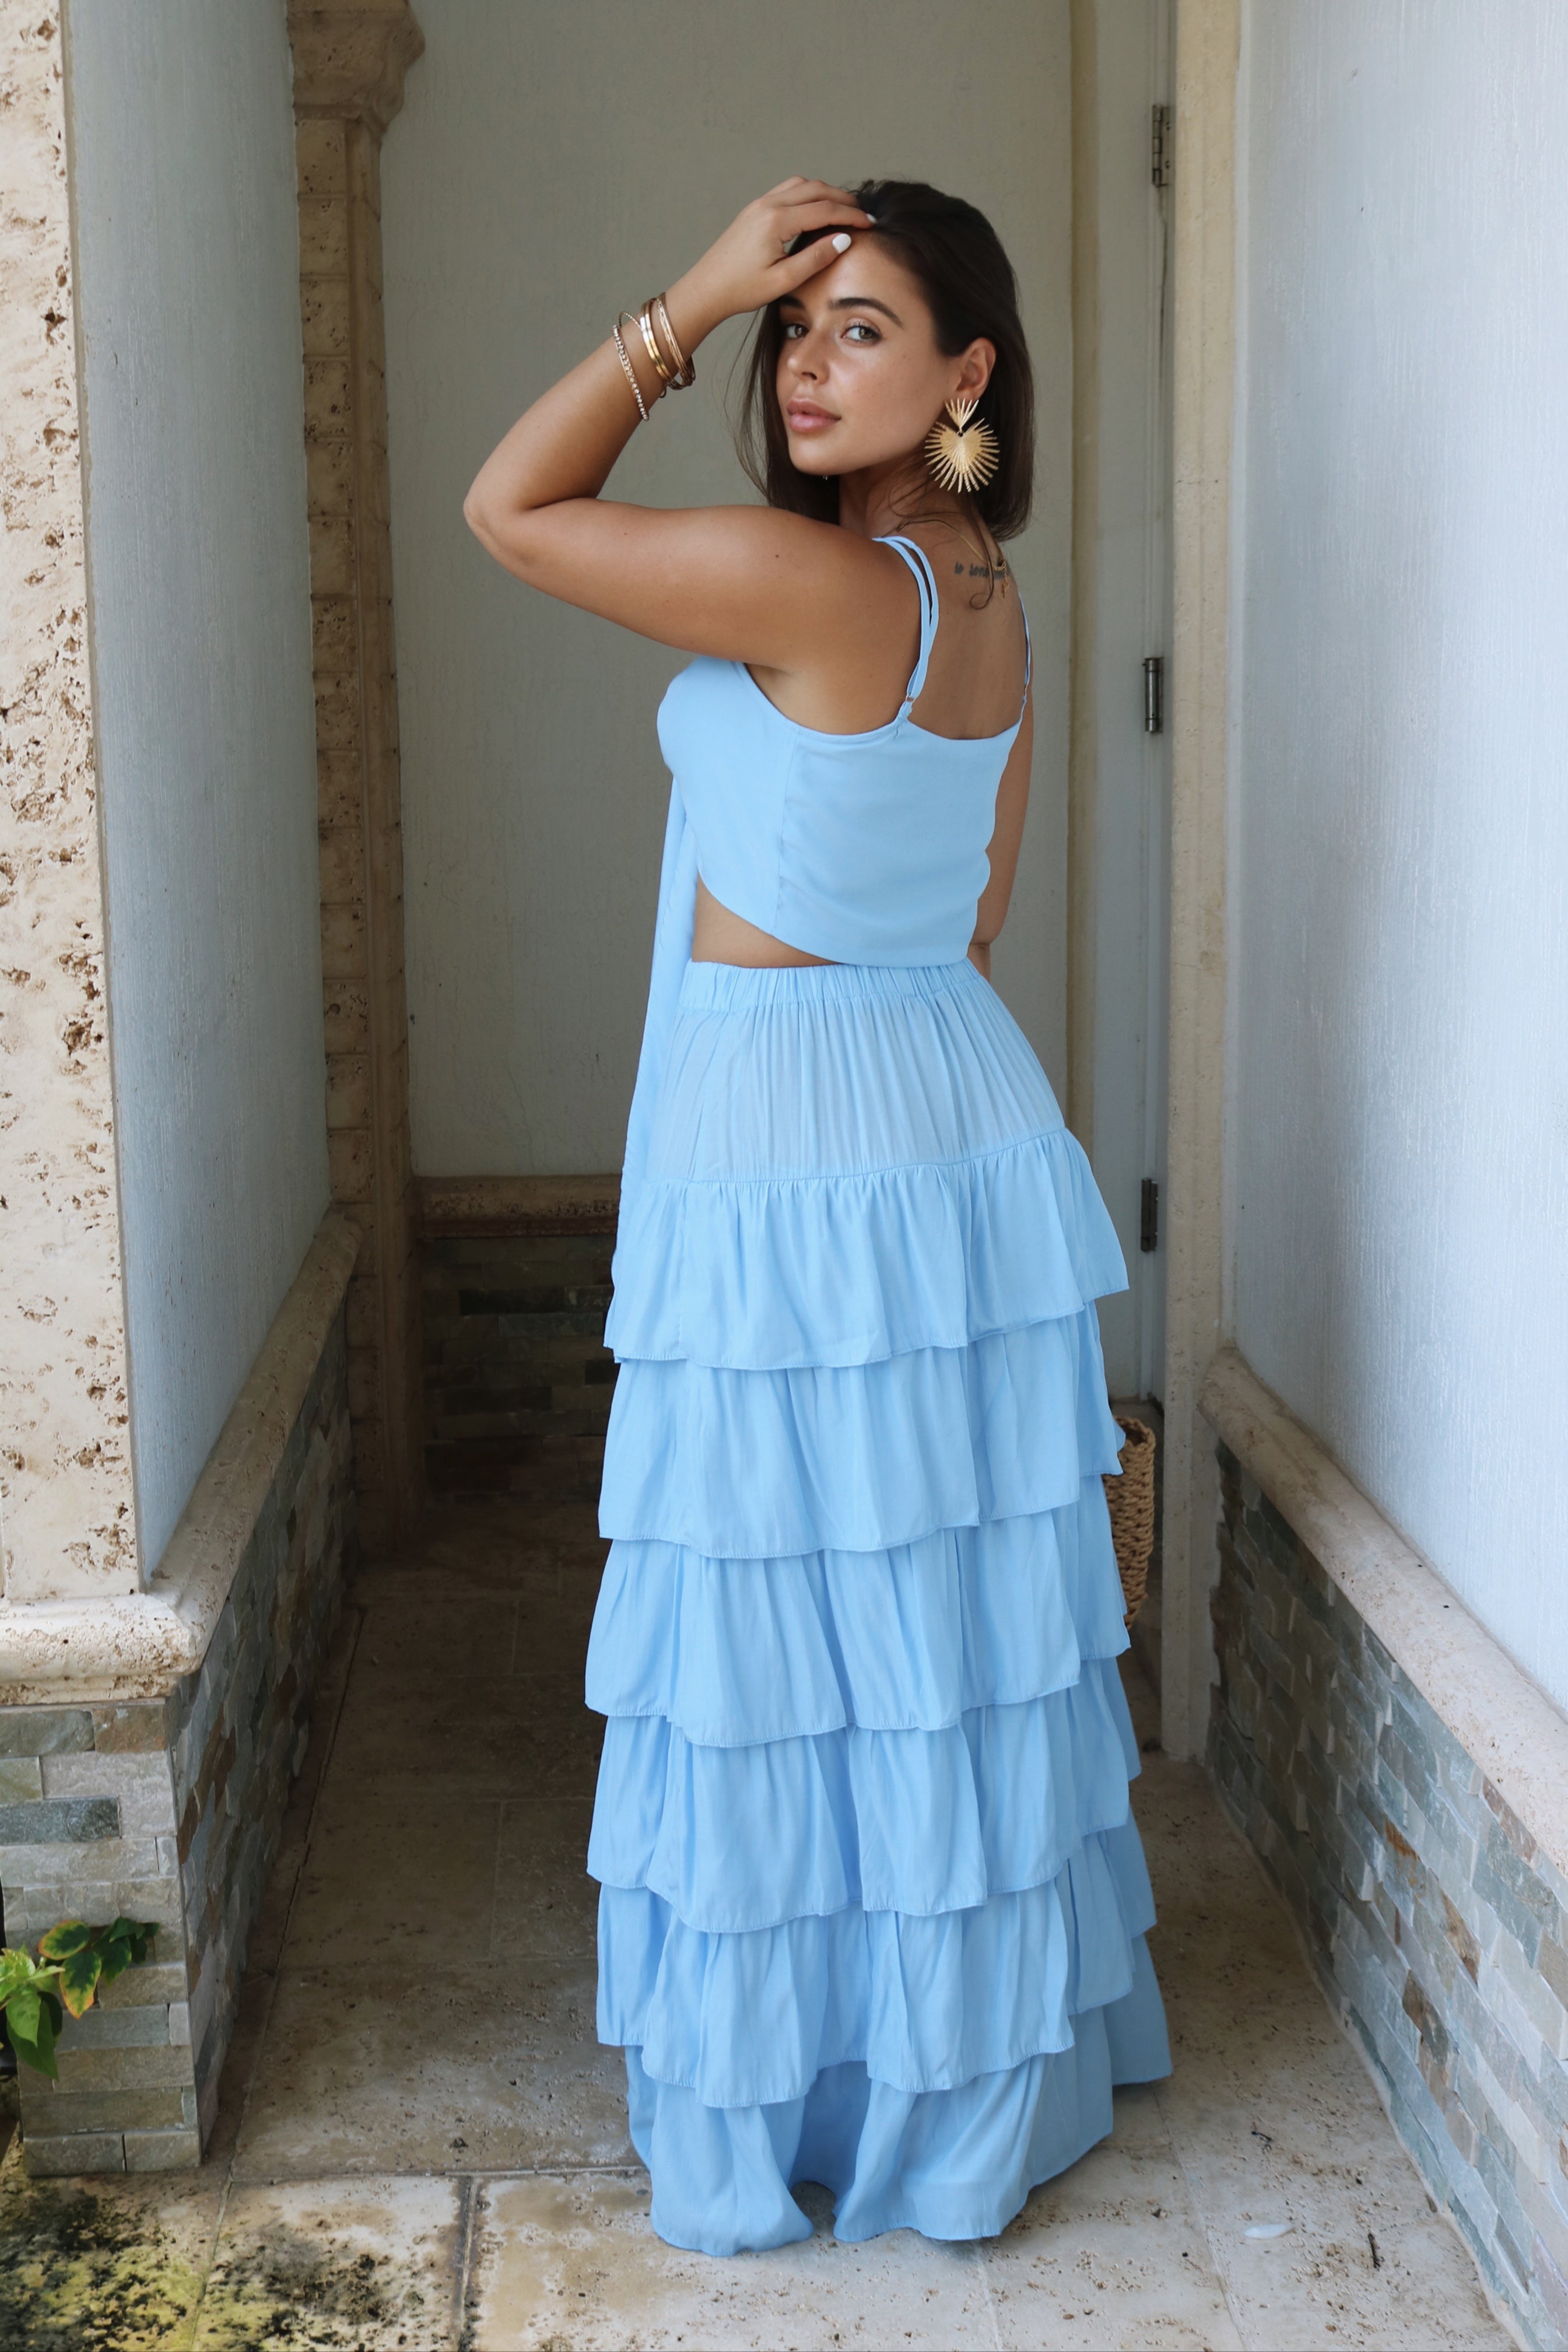 'Salerno' Ruffled Vacation Skirt Set in Dusty Blue